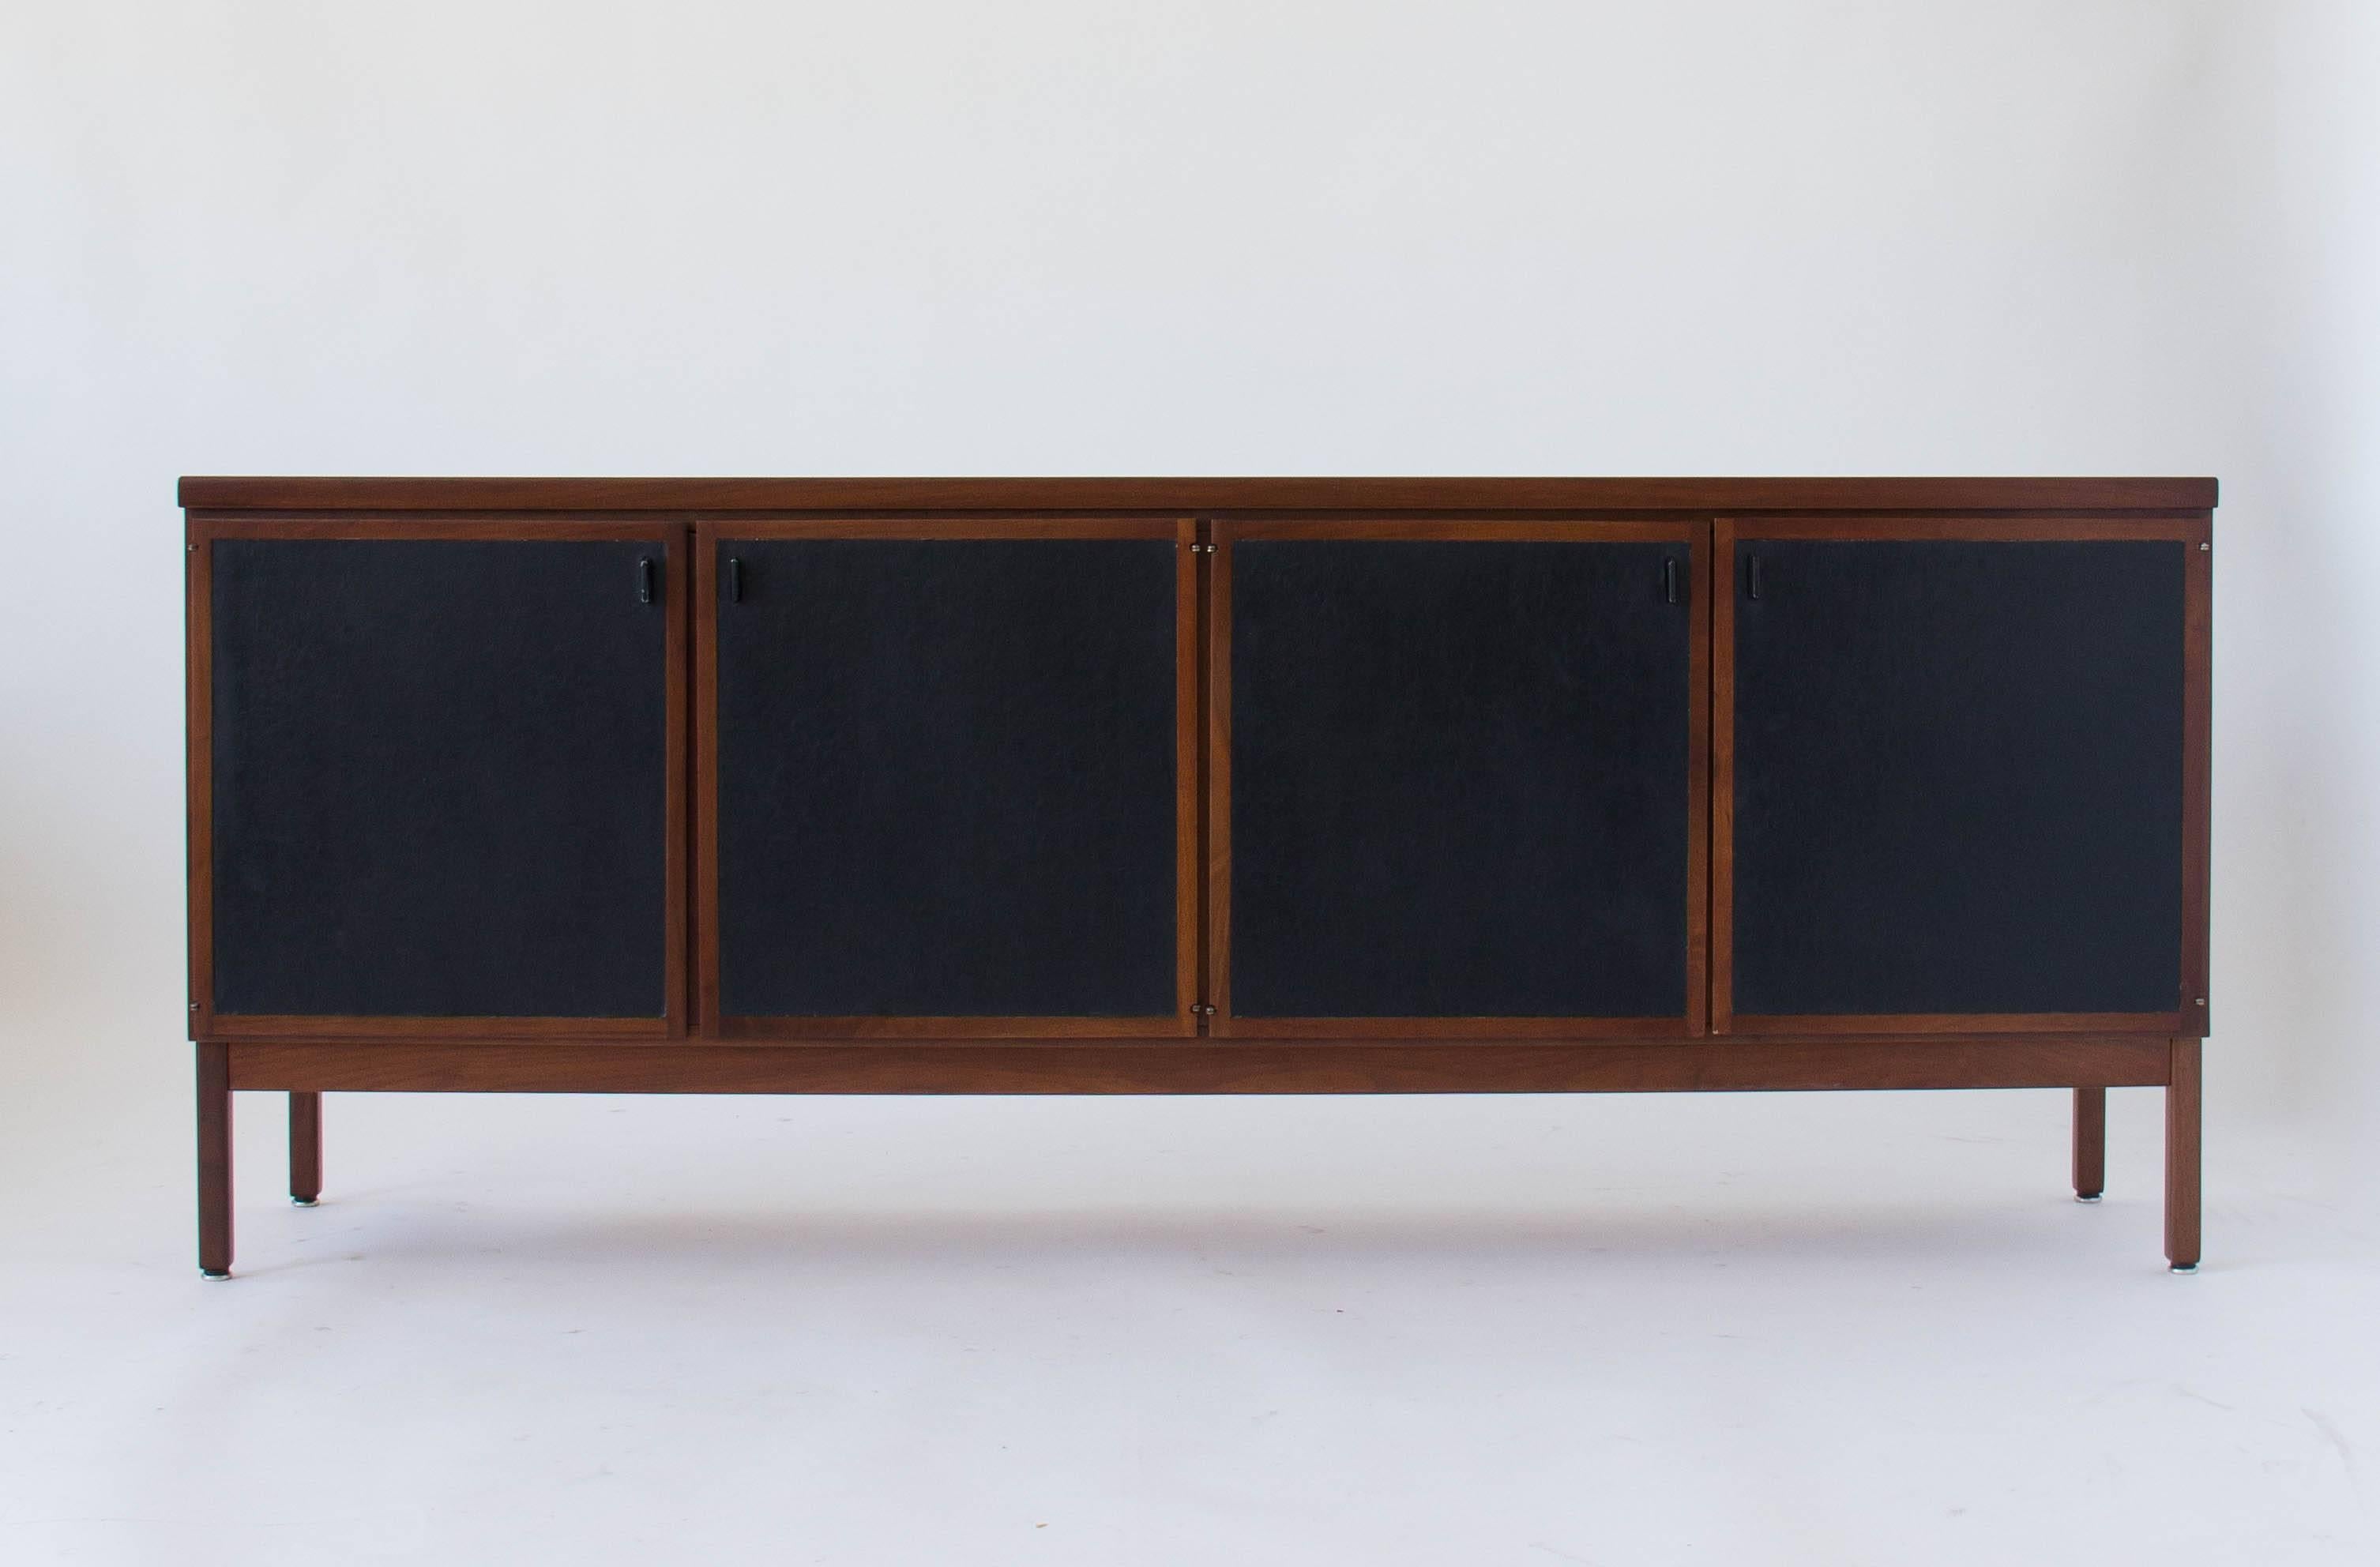 A Mid-Century modern credenza in walnut wood, standing on four square legs of solid walnut. Four leather-paneled doors with flat pulls open on two storage bays. The left-hand bay has two shallow drawers and an open storage space inside; while the